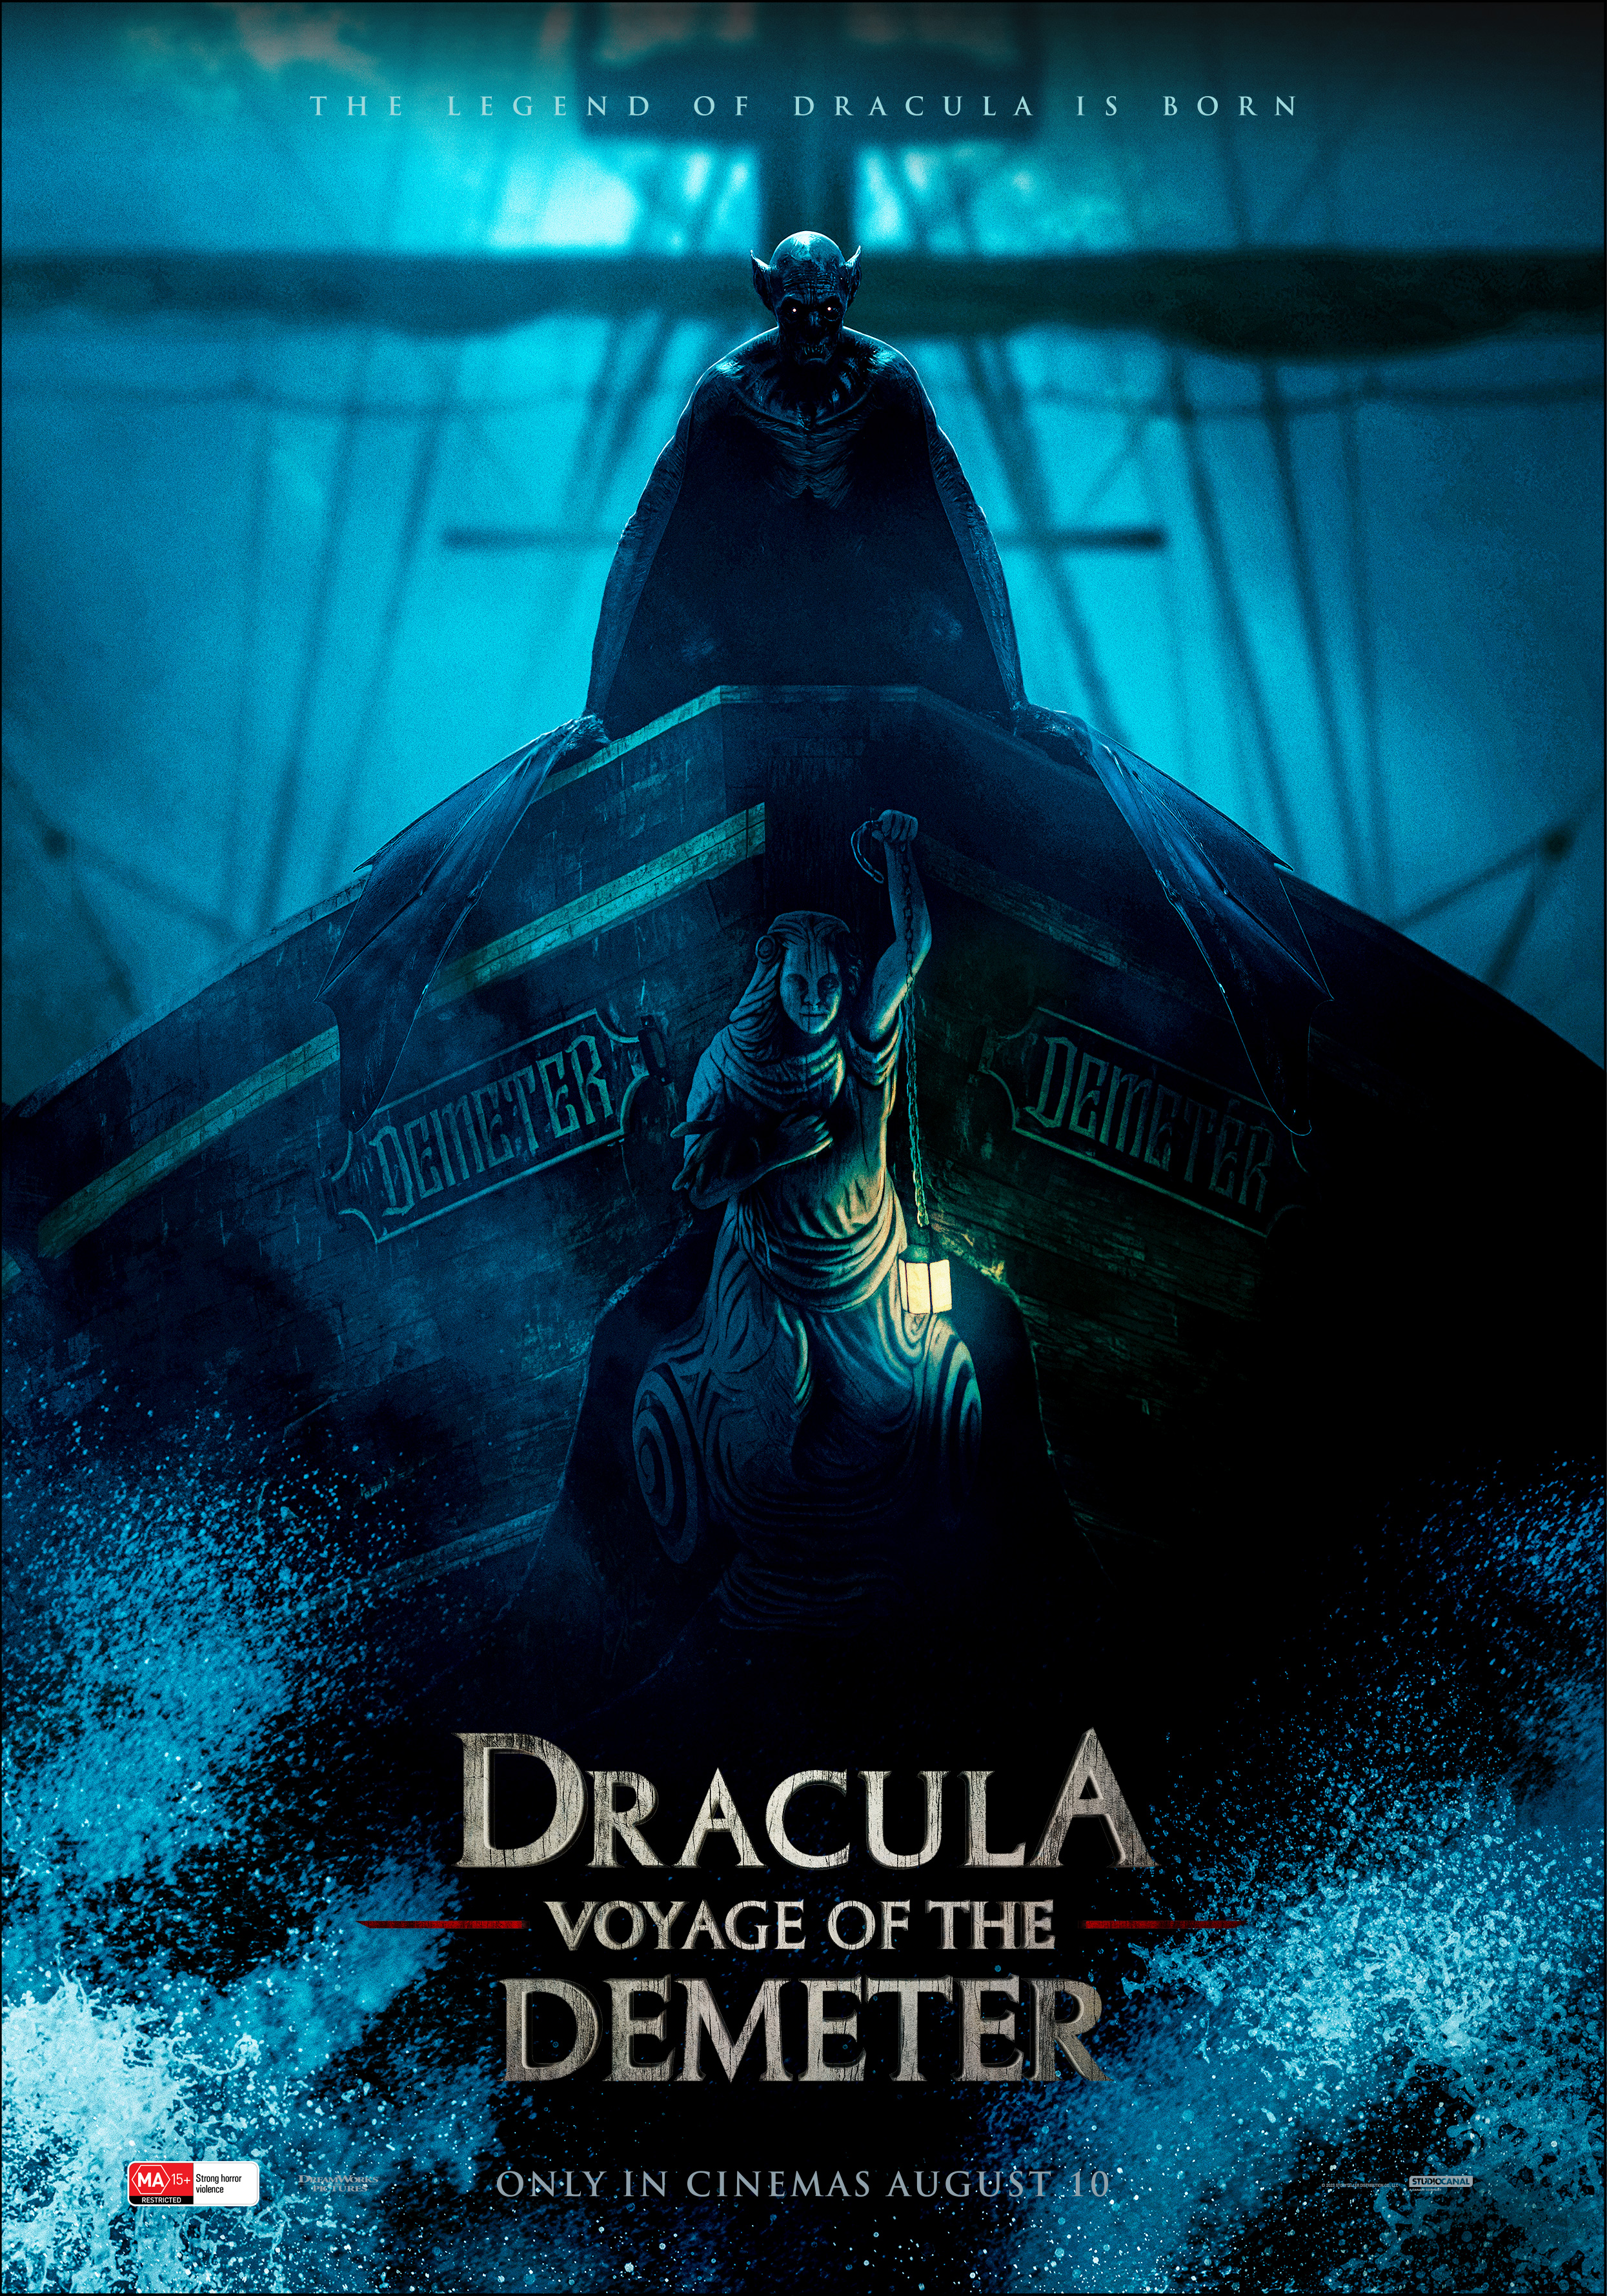 The Last Voyage of the Demeter Explores an Untold Chapter of 'Dracula